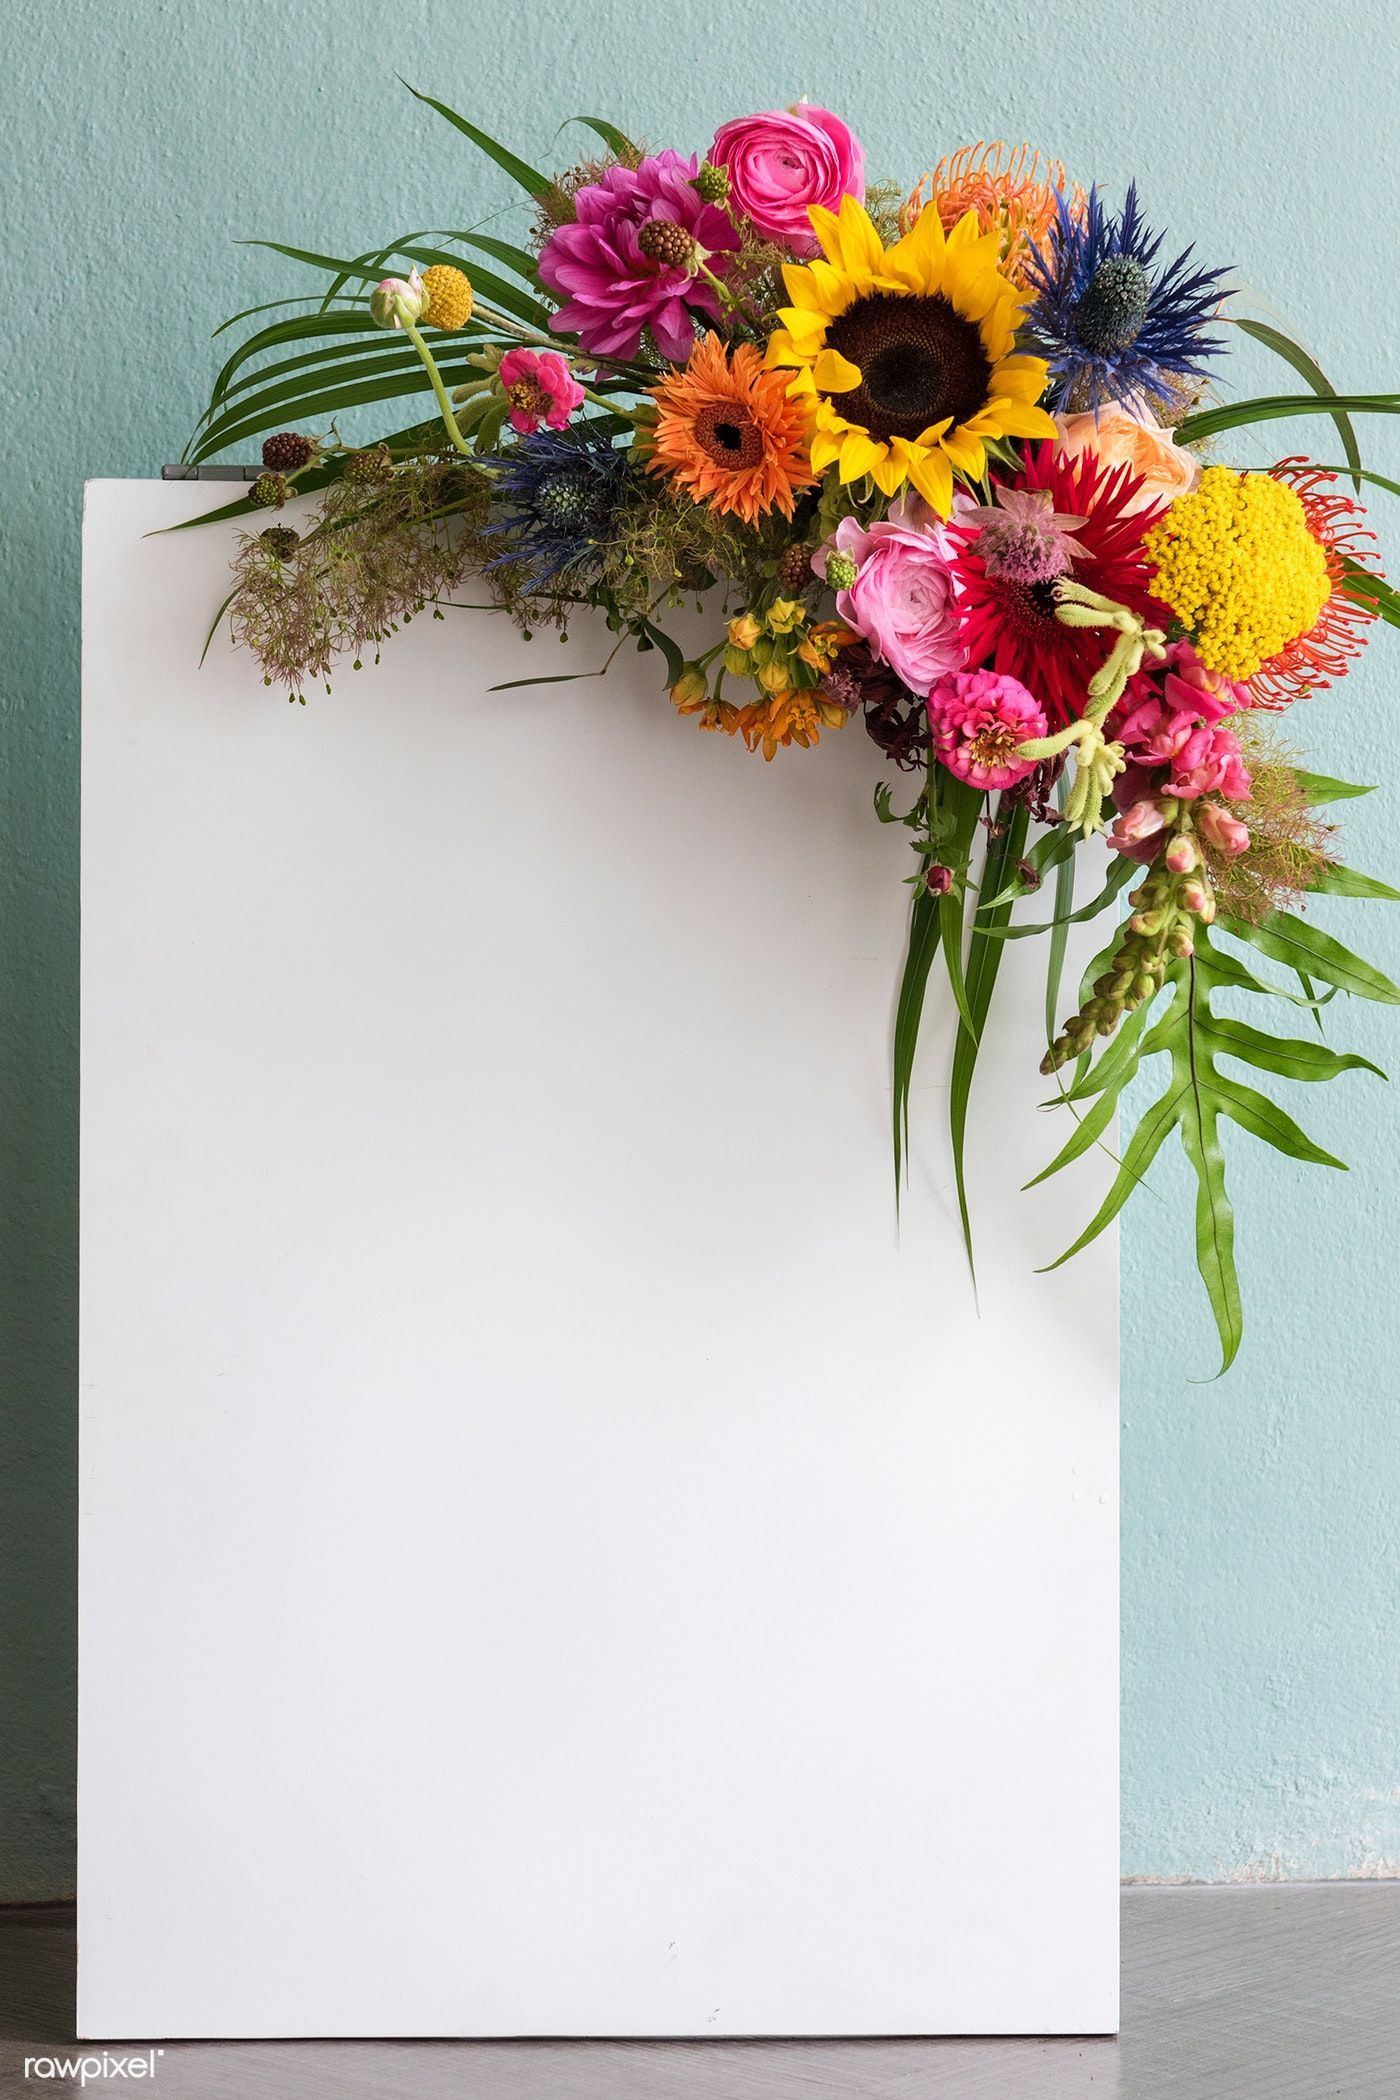 Download premium image of Blank white paper with a bouquet with colorful. Flower background wallpaper, Floral poster, Flower background